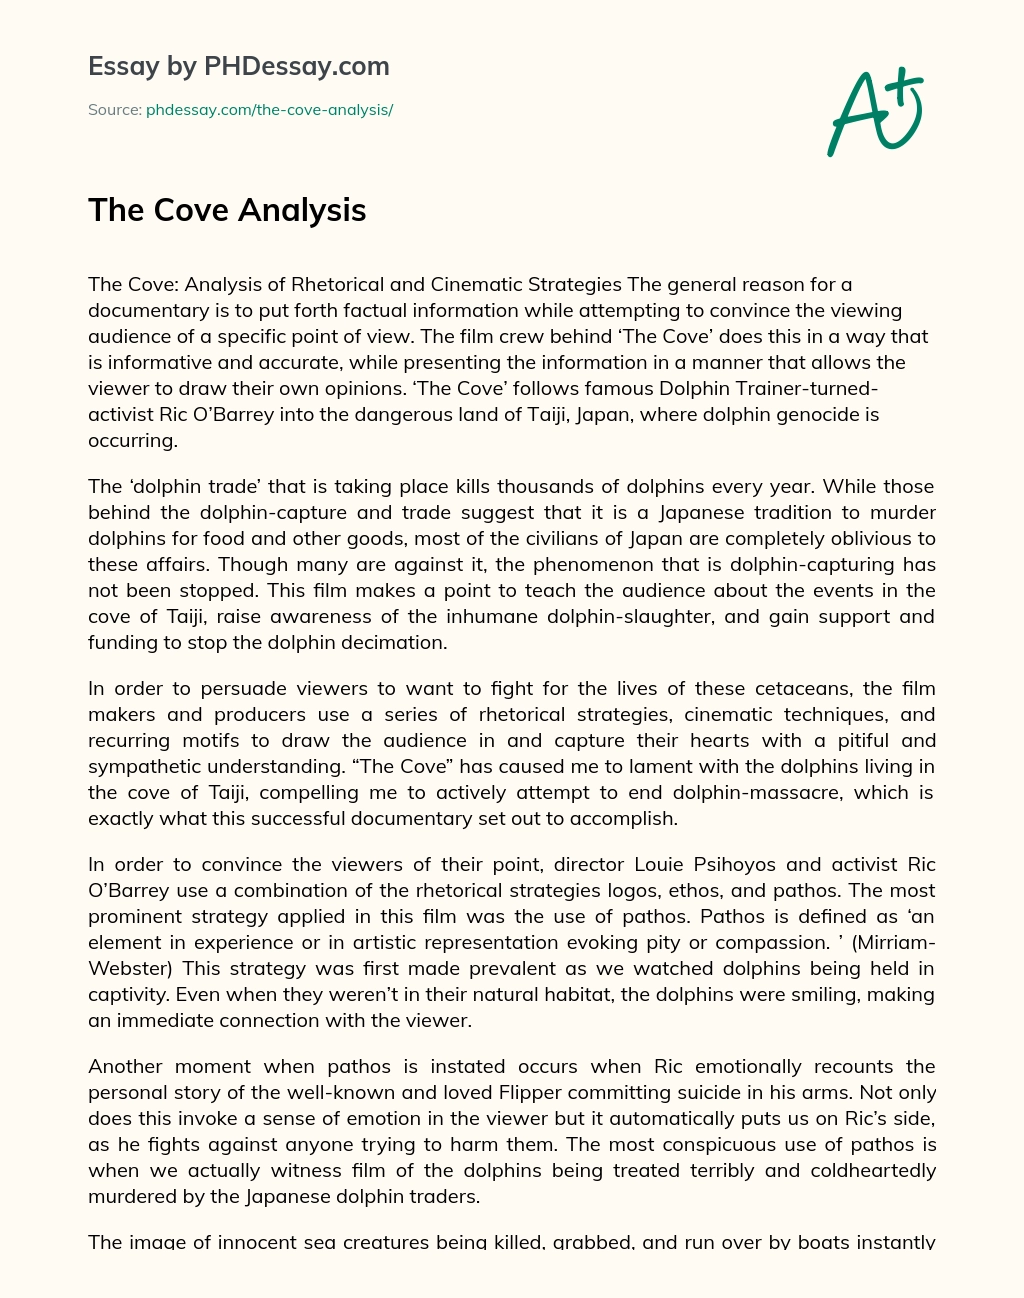 The Cove Analysis essay